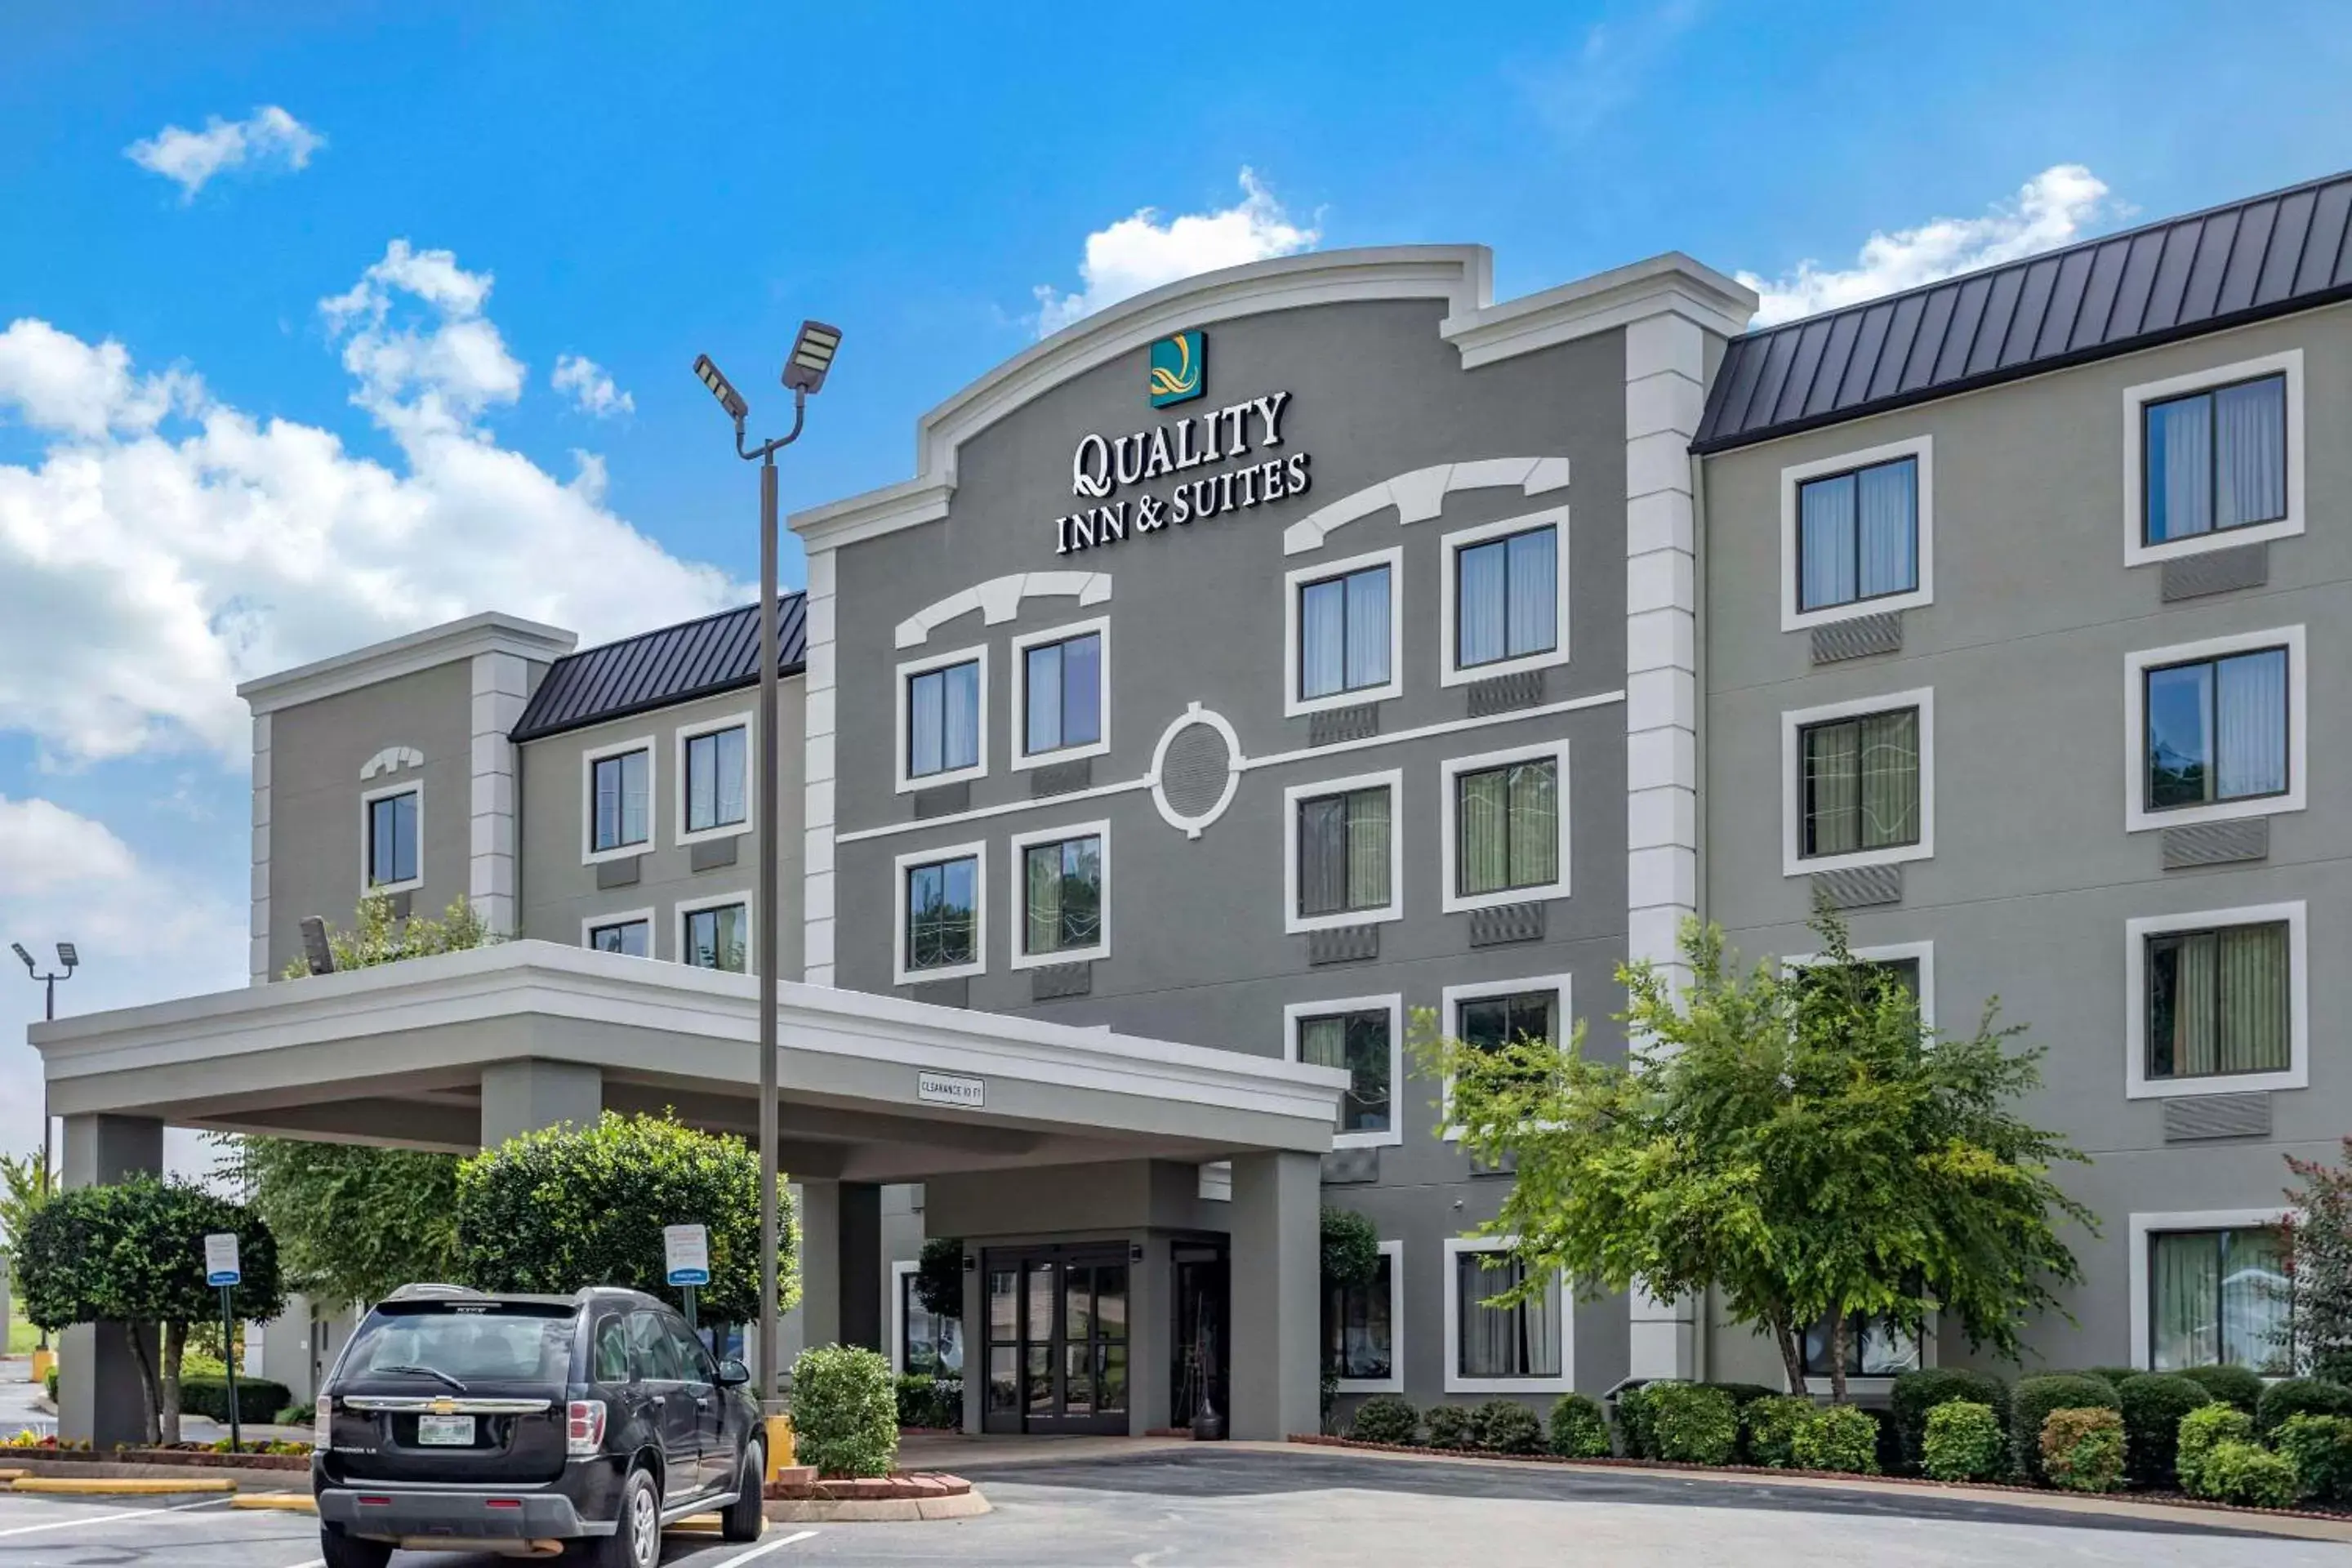 Property Building in Quality Inn & Suites Chattanooga